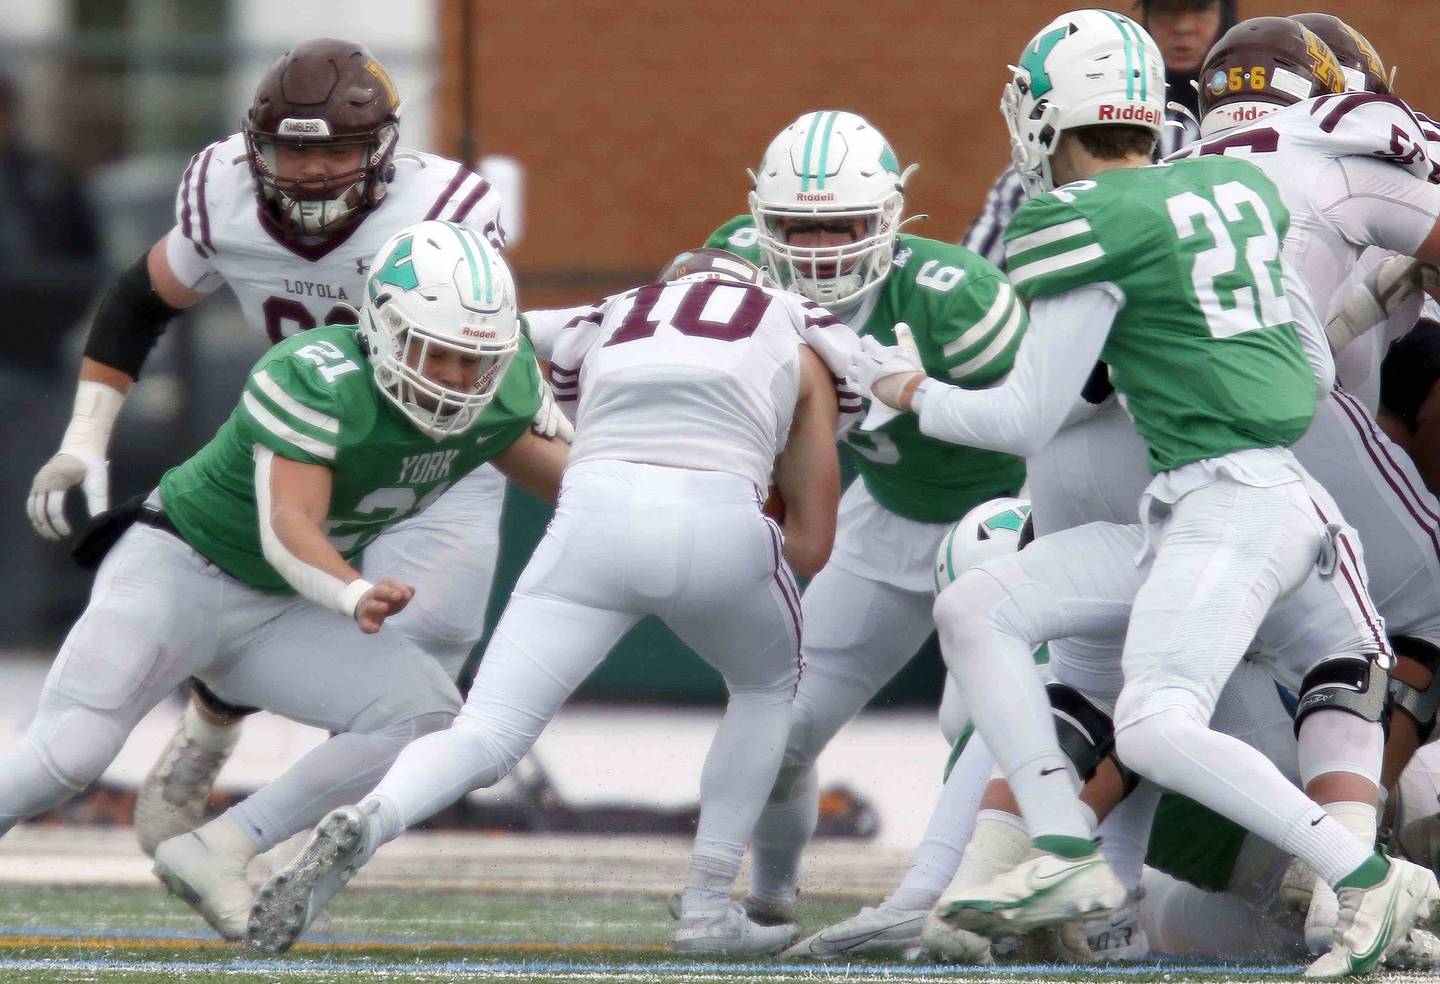 Loyola's Danny Herbert (10) moves upfield as York’s Cole Ostendorf (21)  David Loch (6) and Jack Korzeniowski (22) converge on him during the IHSA Class 8A semifinal football game Saturday November 19, 2022 in Elmhurst.